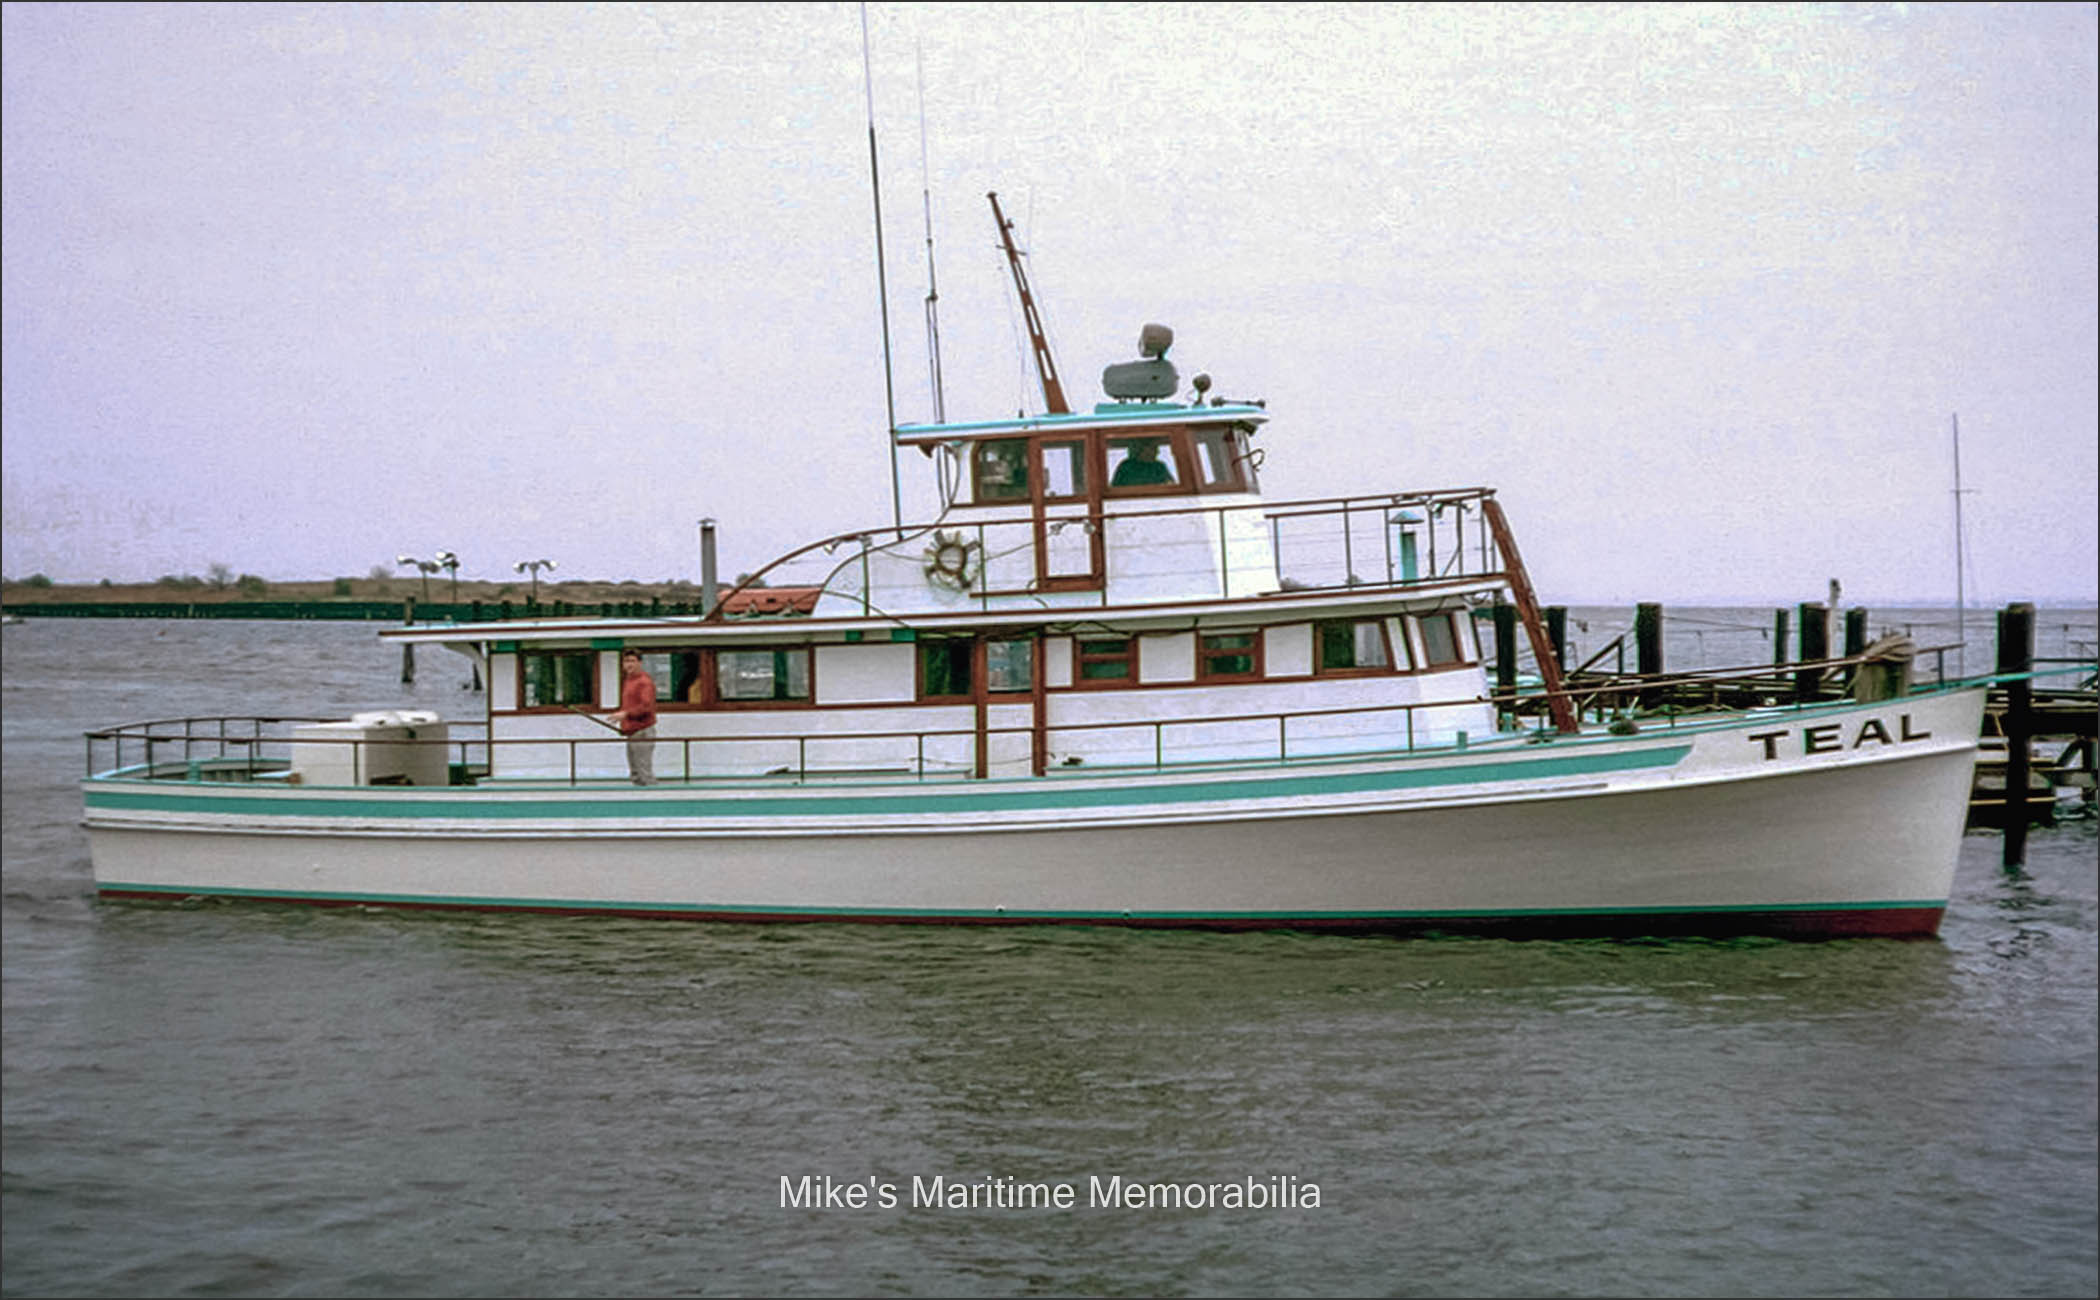 TEAL, Great Kills, NY – 1964 The "TEAL" from Shoals Dock, Great Kills, Staten Island, NY circa 1964. Gillikin Boat Works built her in 1961 at Harkers Island, NC. She was admired by many as one of the nicest looking party boats to sail in the New York / New Jersey fleet. Captain Freddie Moore operated the "TEAL" and he was one of the pioneers of open boat tuna fishing on the East Coast. The photo is courtesy of Ken Ekberg.